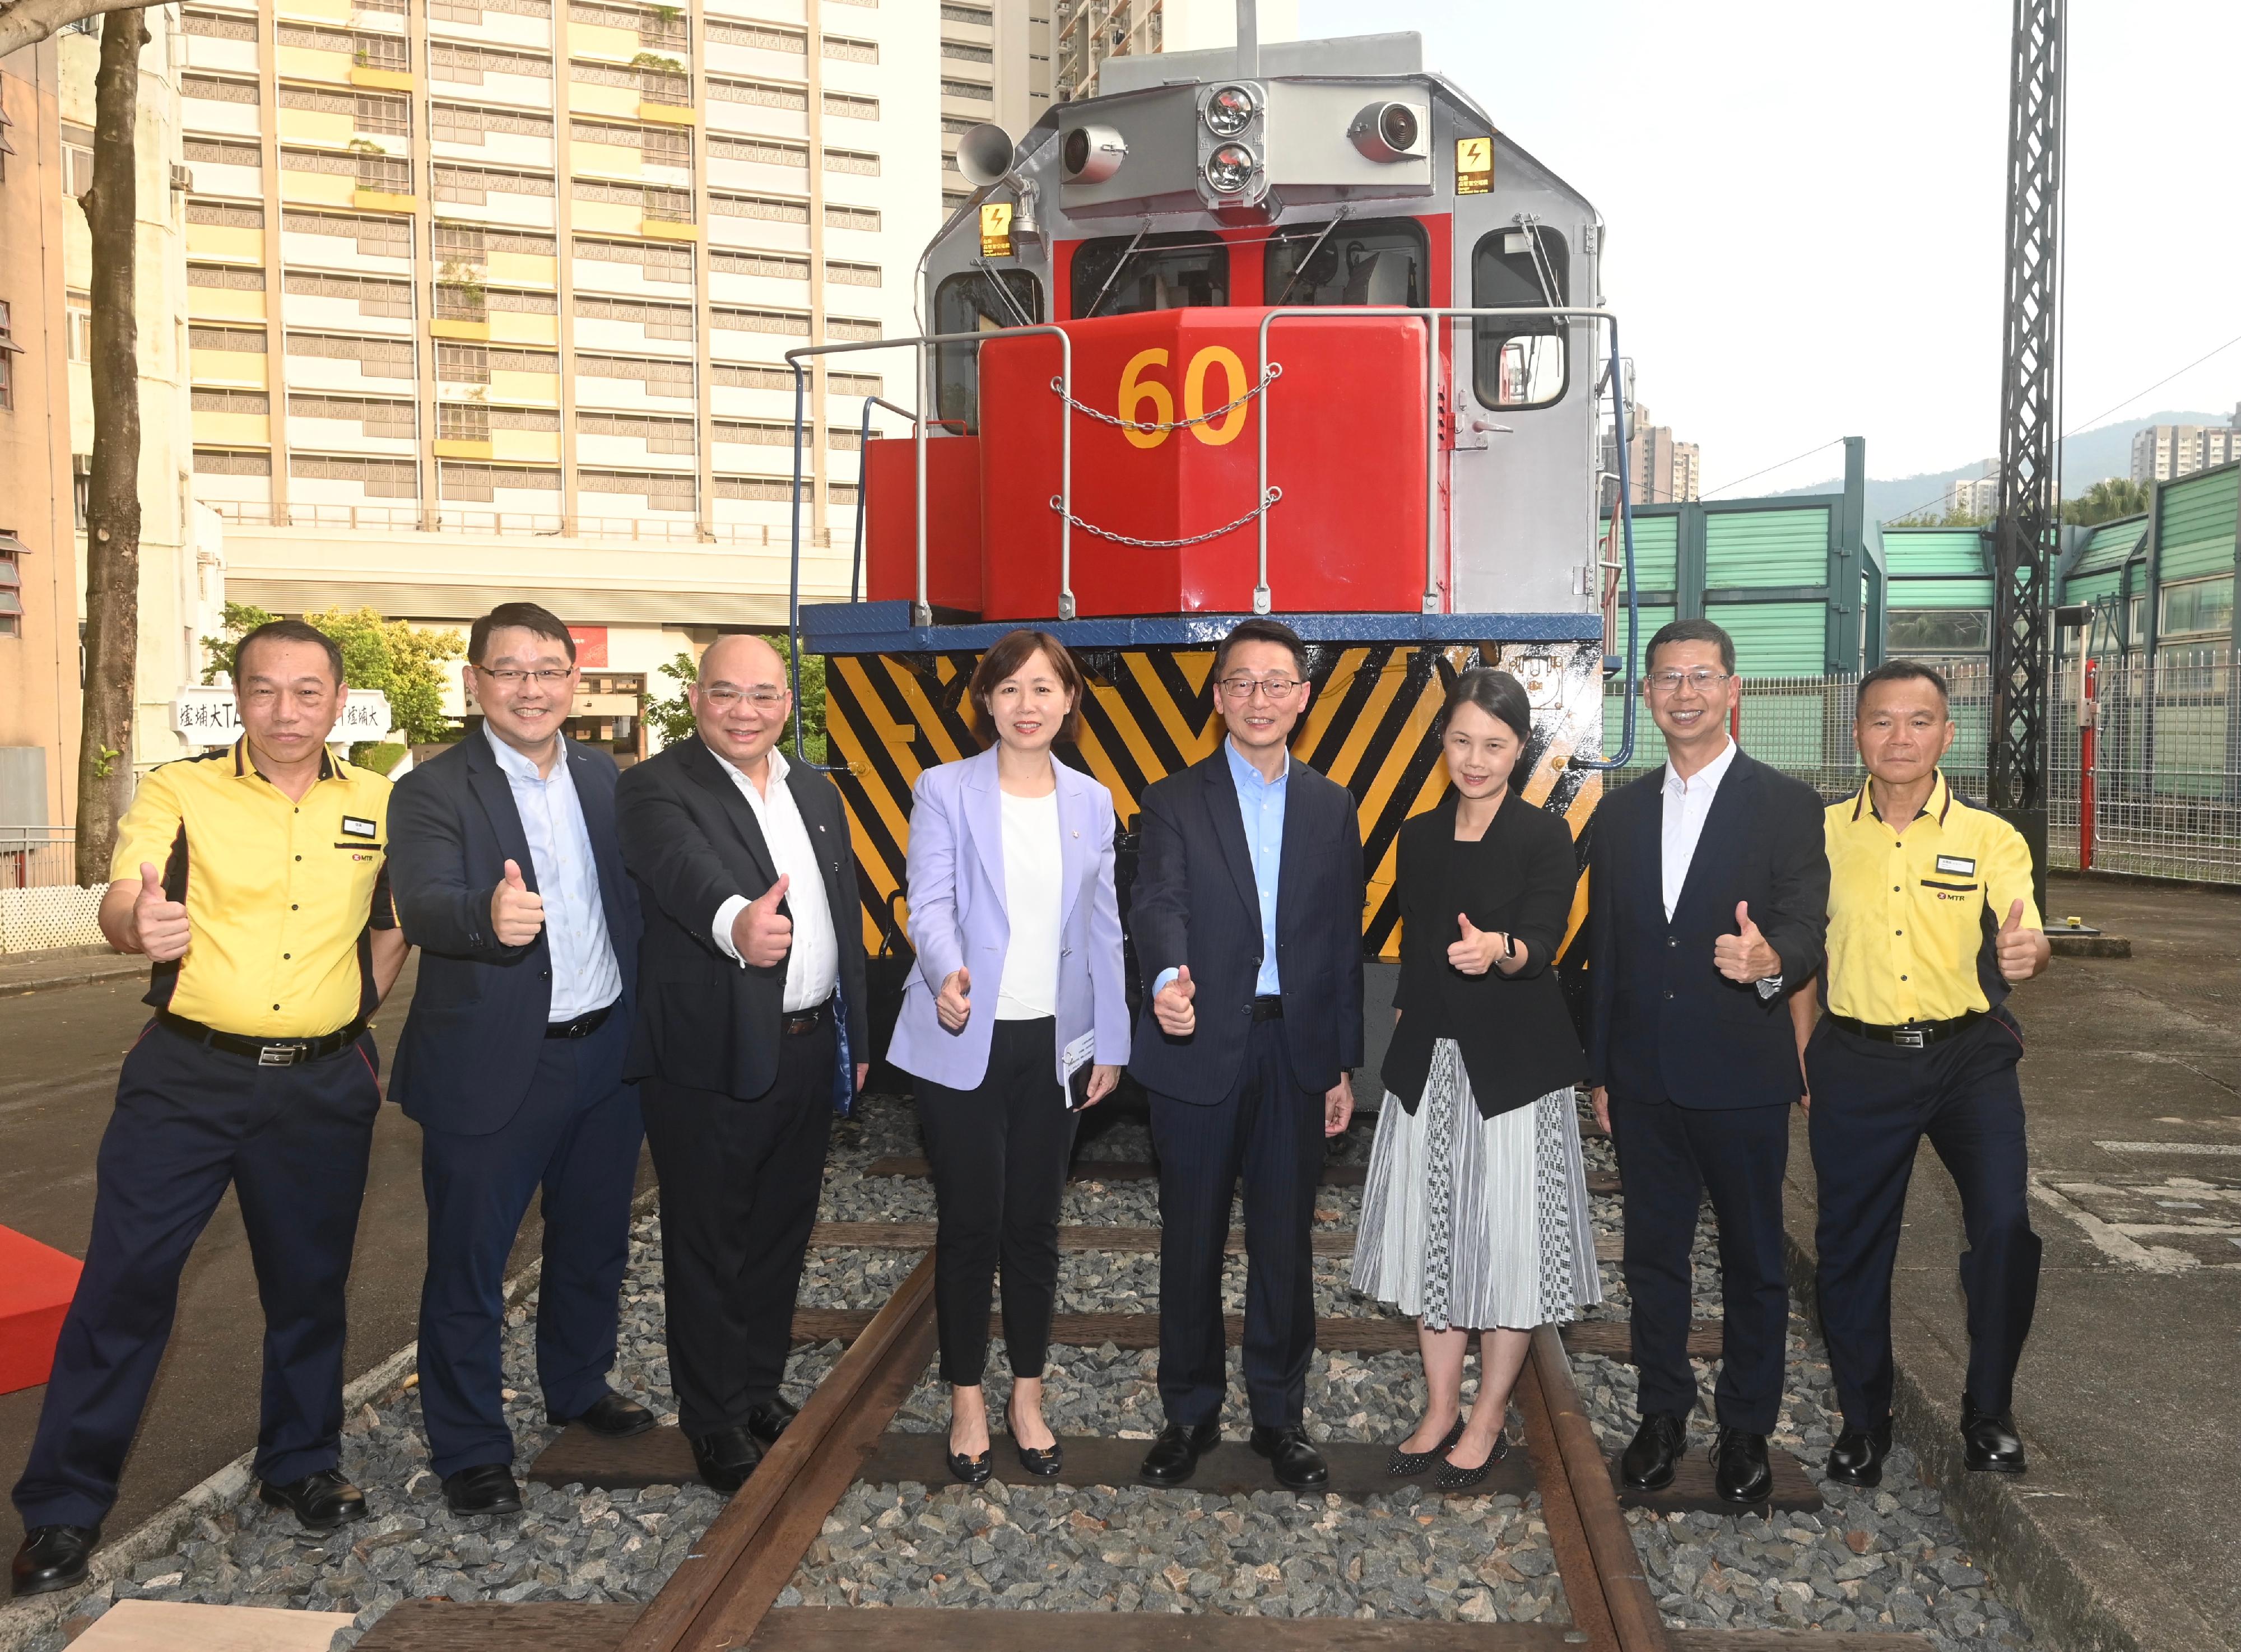 The handover ceremony of Diesel Electric Engine No. 60 (L60) was held today (October 3) at the Hong Kong Railway Museum. Photo shows (from left) a former driver of L60, Mr Cheung Shun-chuen; the Museum Director of the Hong Kong Heritage Museum, Mr Brian Lam; the Operations and Innovation Director of the MTR Corporation Limited (MTRC), Dr Tony Lee; the Managing Director - Hong Kong Transport Services of the MTRC, Ms Jeny Yeung; the Director of Leisure and Cultural Services, Mr Vincent Liu; the Corporate Affairs and Branding Director of the MTRC, Ms Linda Choy; the Company Secretary of the Kowloon-Canton Railway Corporation, Mr C L Wong; and a former driver of L60, Mr Ko Tak-tim, at the ceremony.